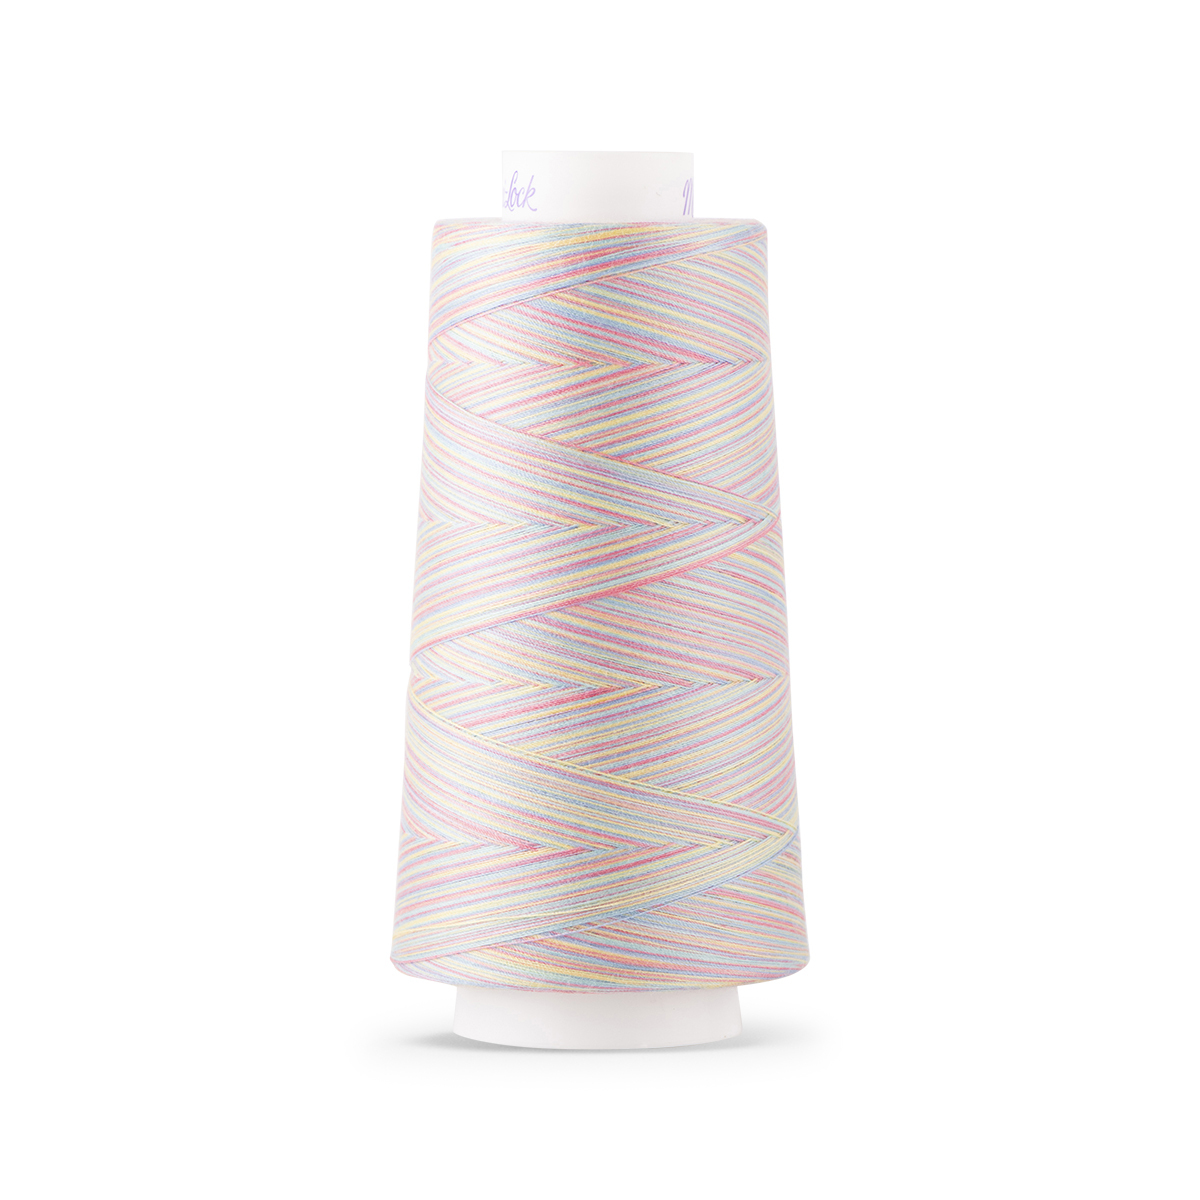 Serger Thread, All-Purpose Thread for Sewing, Rainbow Thread, Variegated Polyester Sewing Thread, 4 Cones of 3000 Yards Each Spool Thread for Sewing